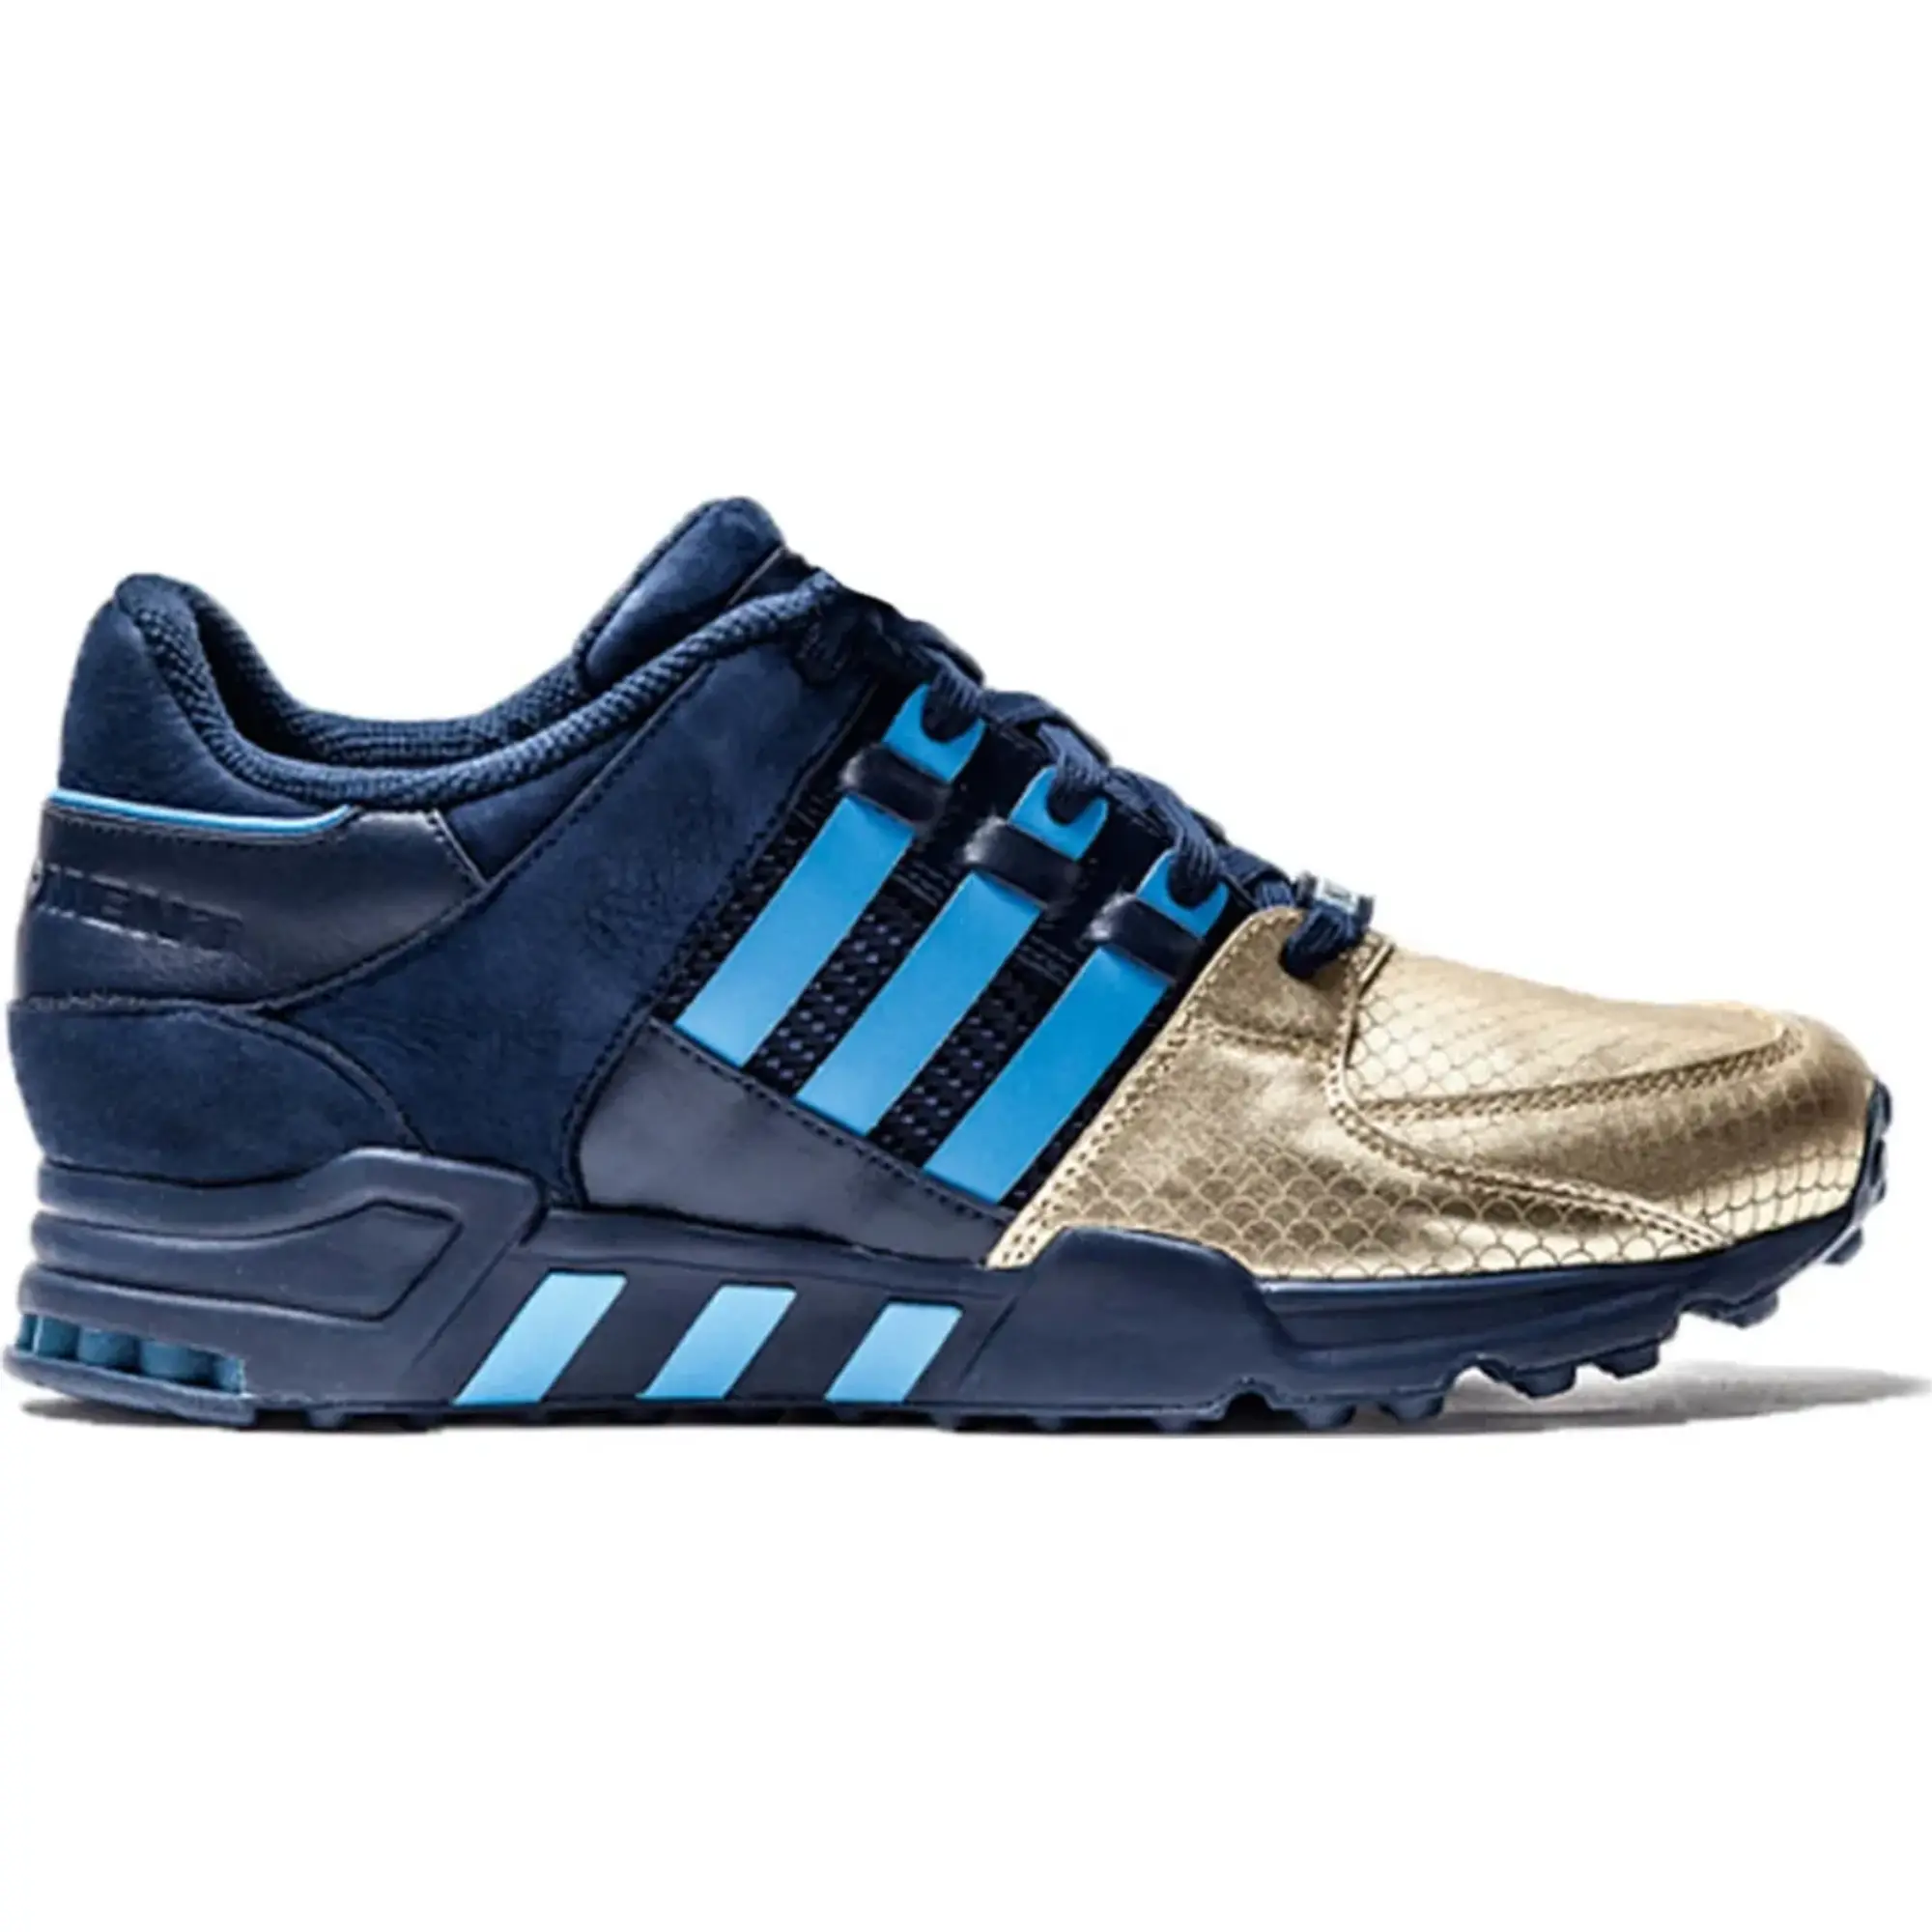 adidas EQT Support 93 Ronnie Fieg KITH NYC Bravest